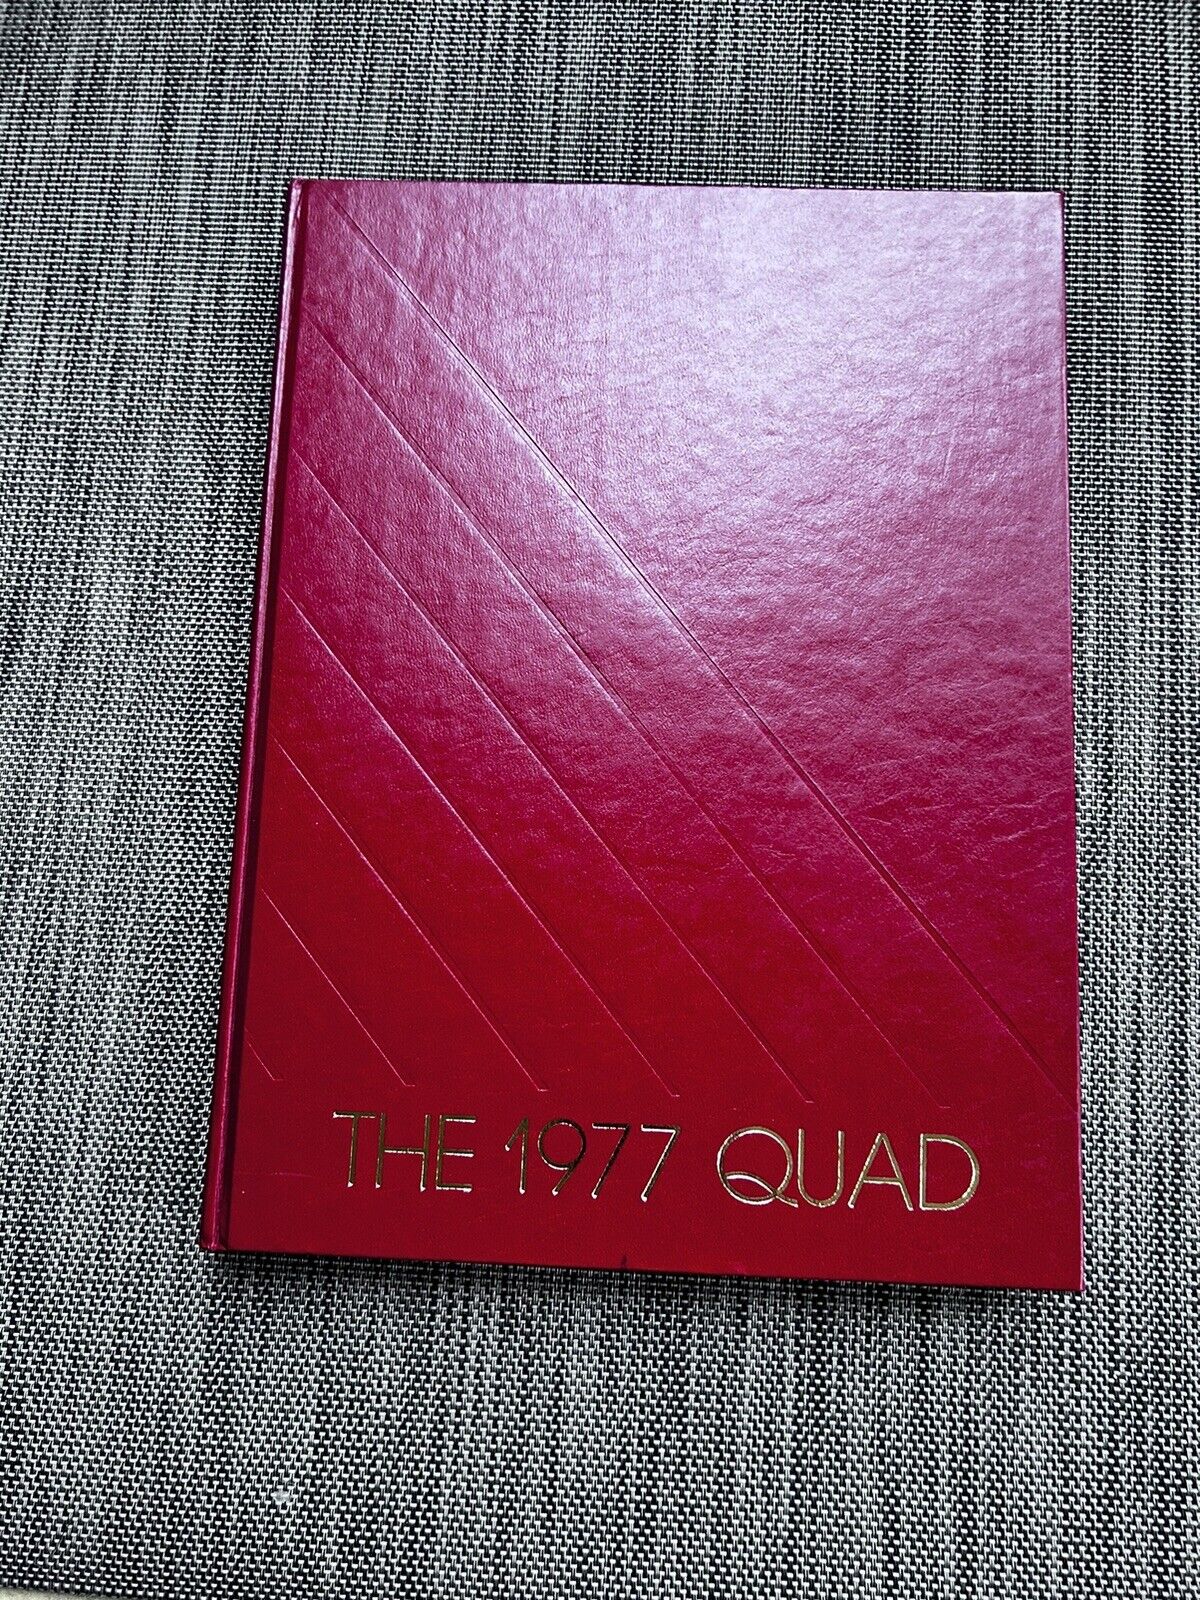 Stanford University The Quad Yearbook 1977 Hardcover No Signatures